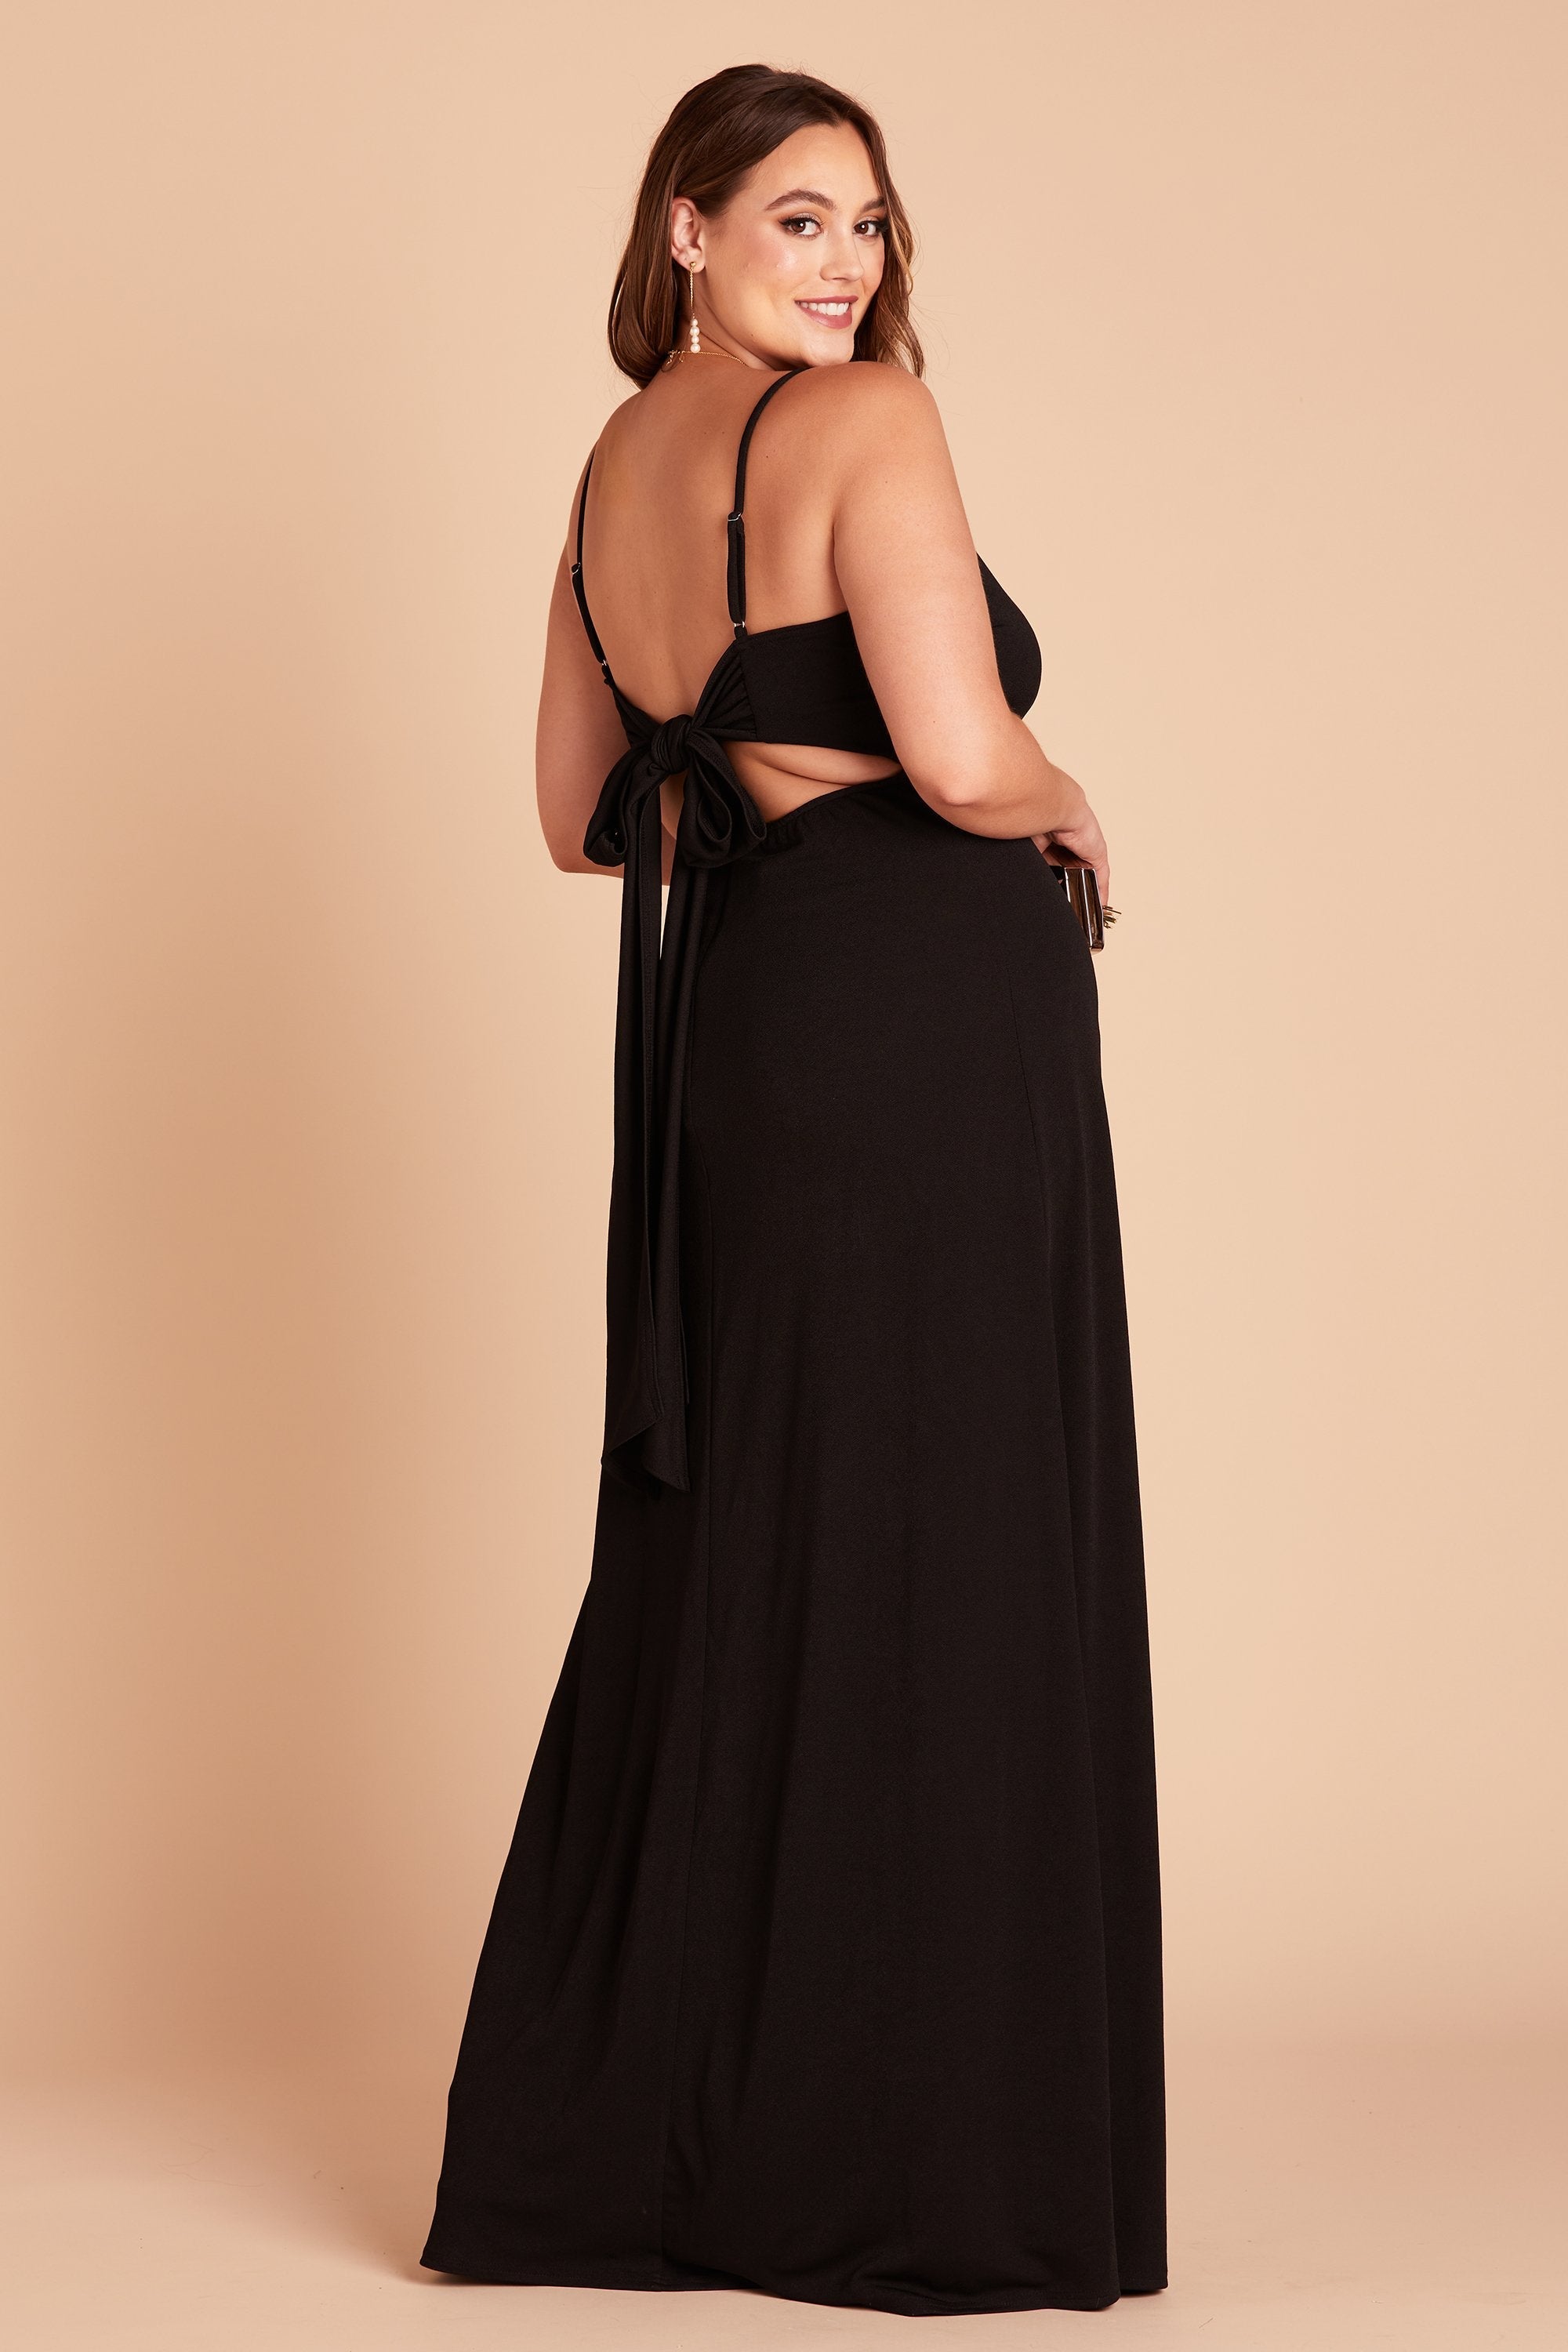 Benny plus size bridesmaid dress in black crepe by Birdy Grey, side view